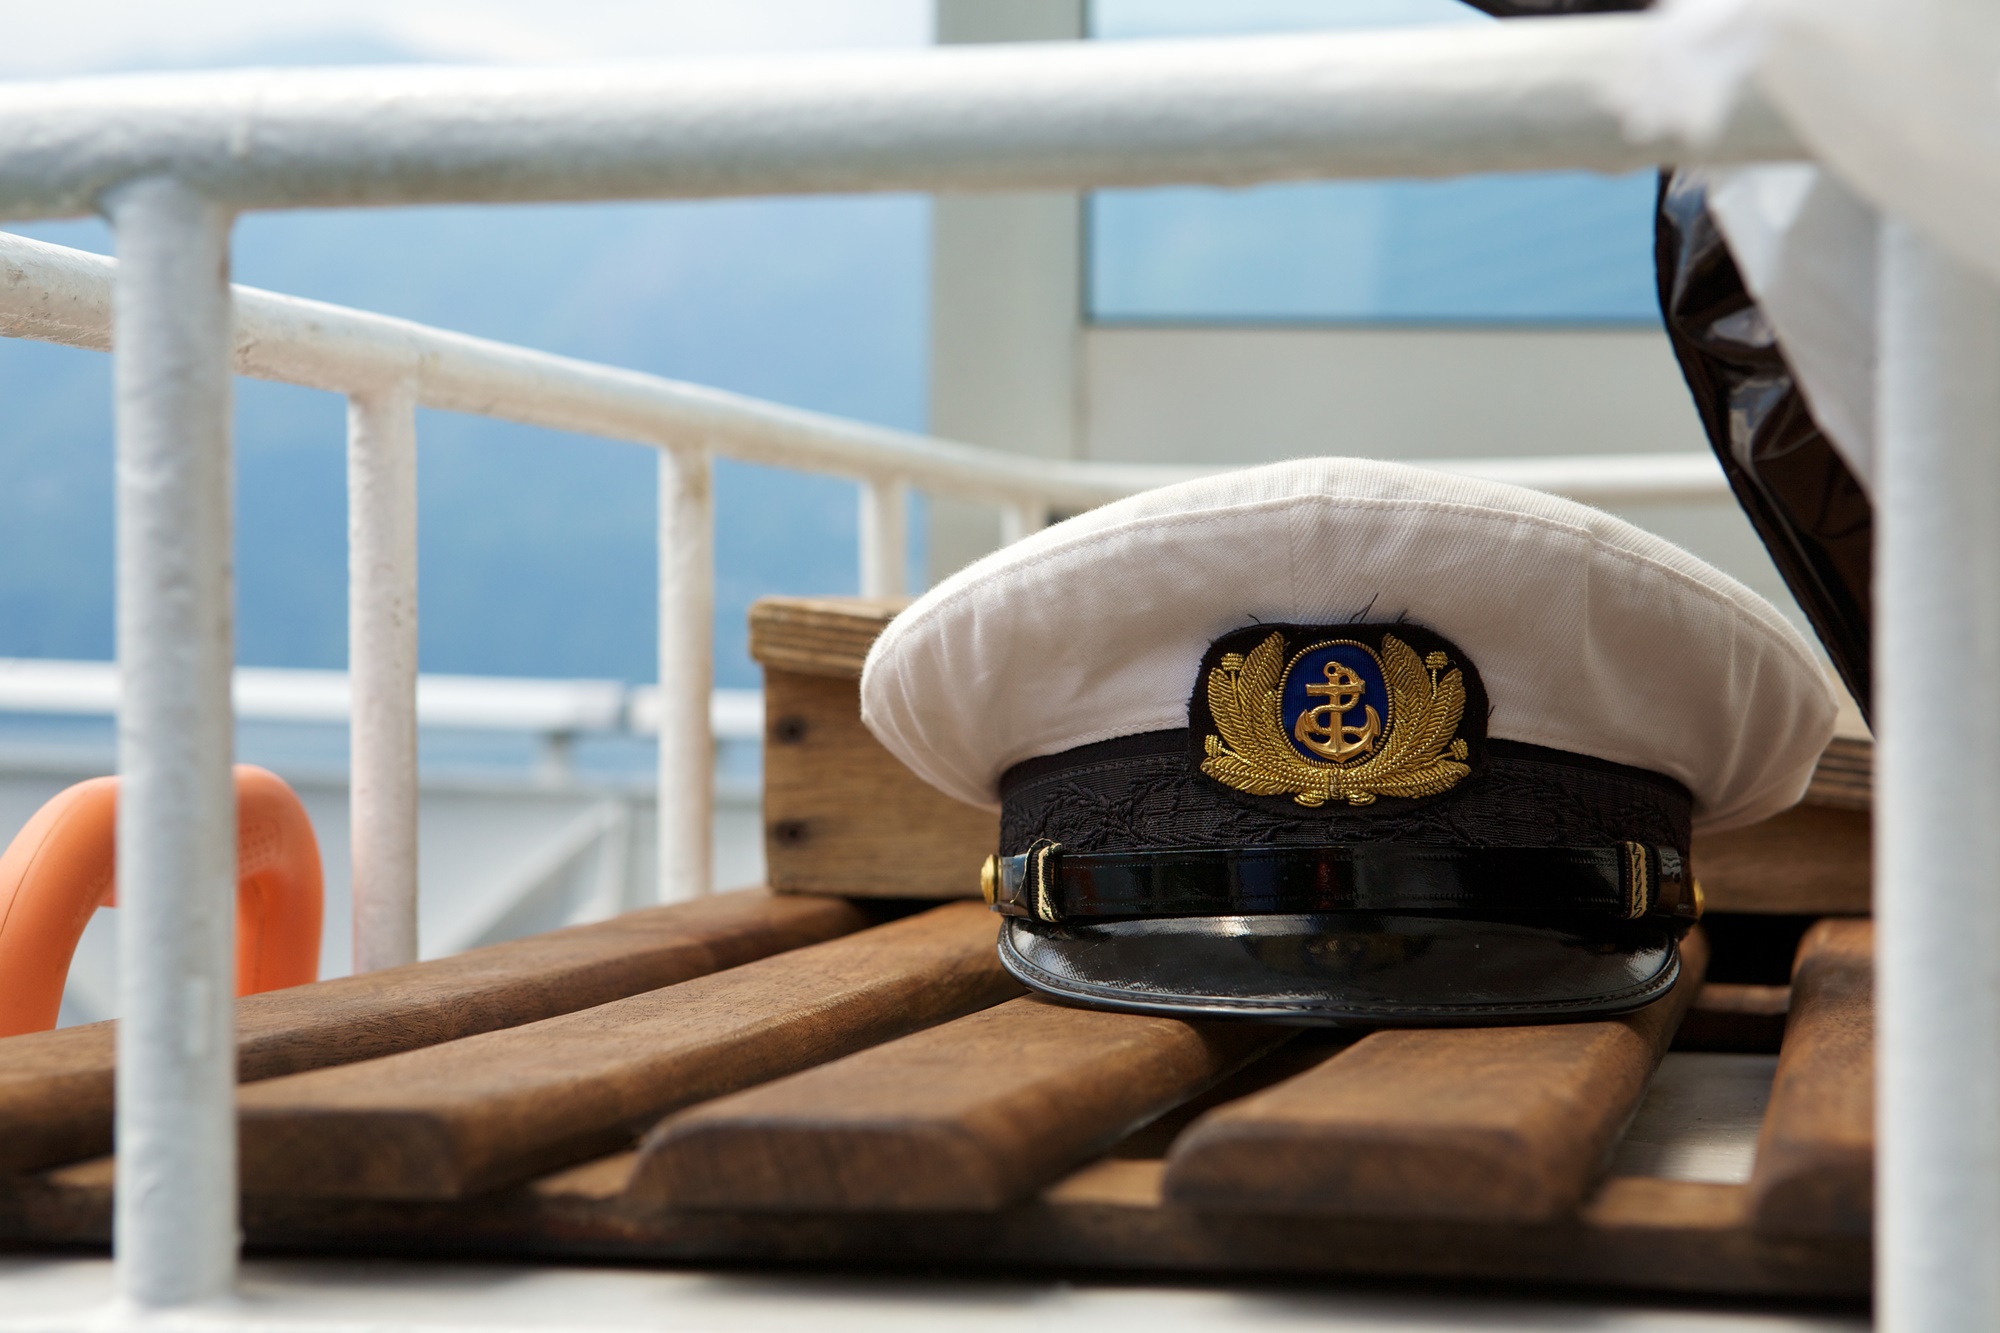 Captains cap on board on a wooden bench